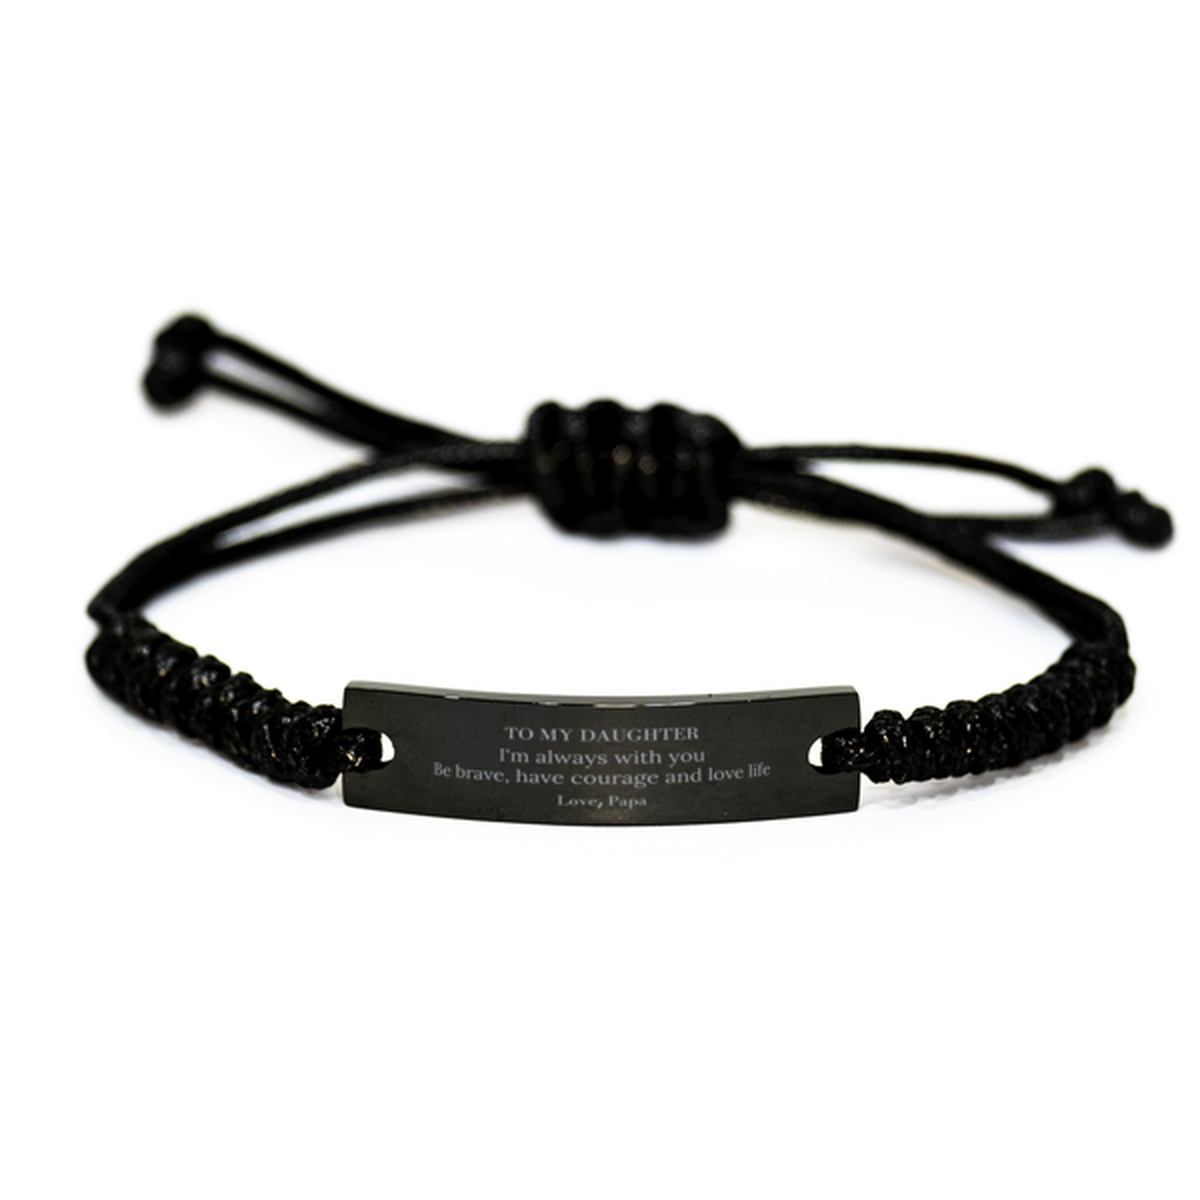 To My Daughter Gifts from Papa, Unique Black Rope Bracelet Inspirational Christmas Birthday Graduation Gifts for Daughter I'm always with you. Be brave, have courage and love life. Love, Papa